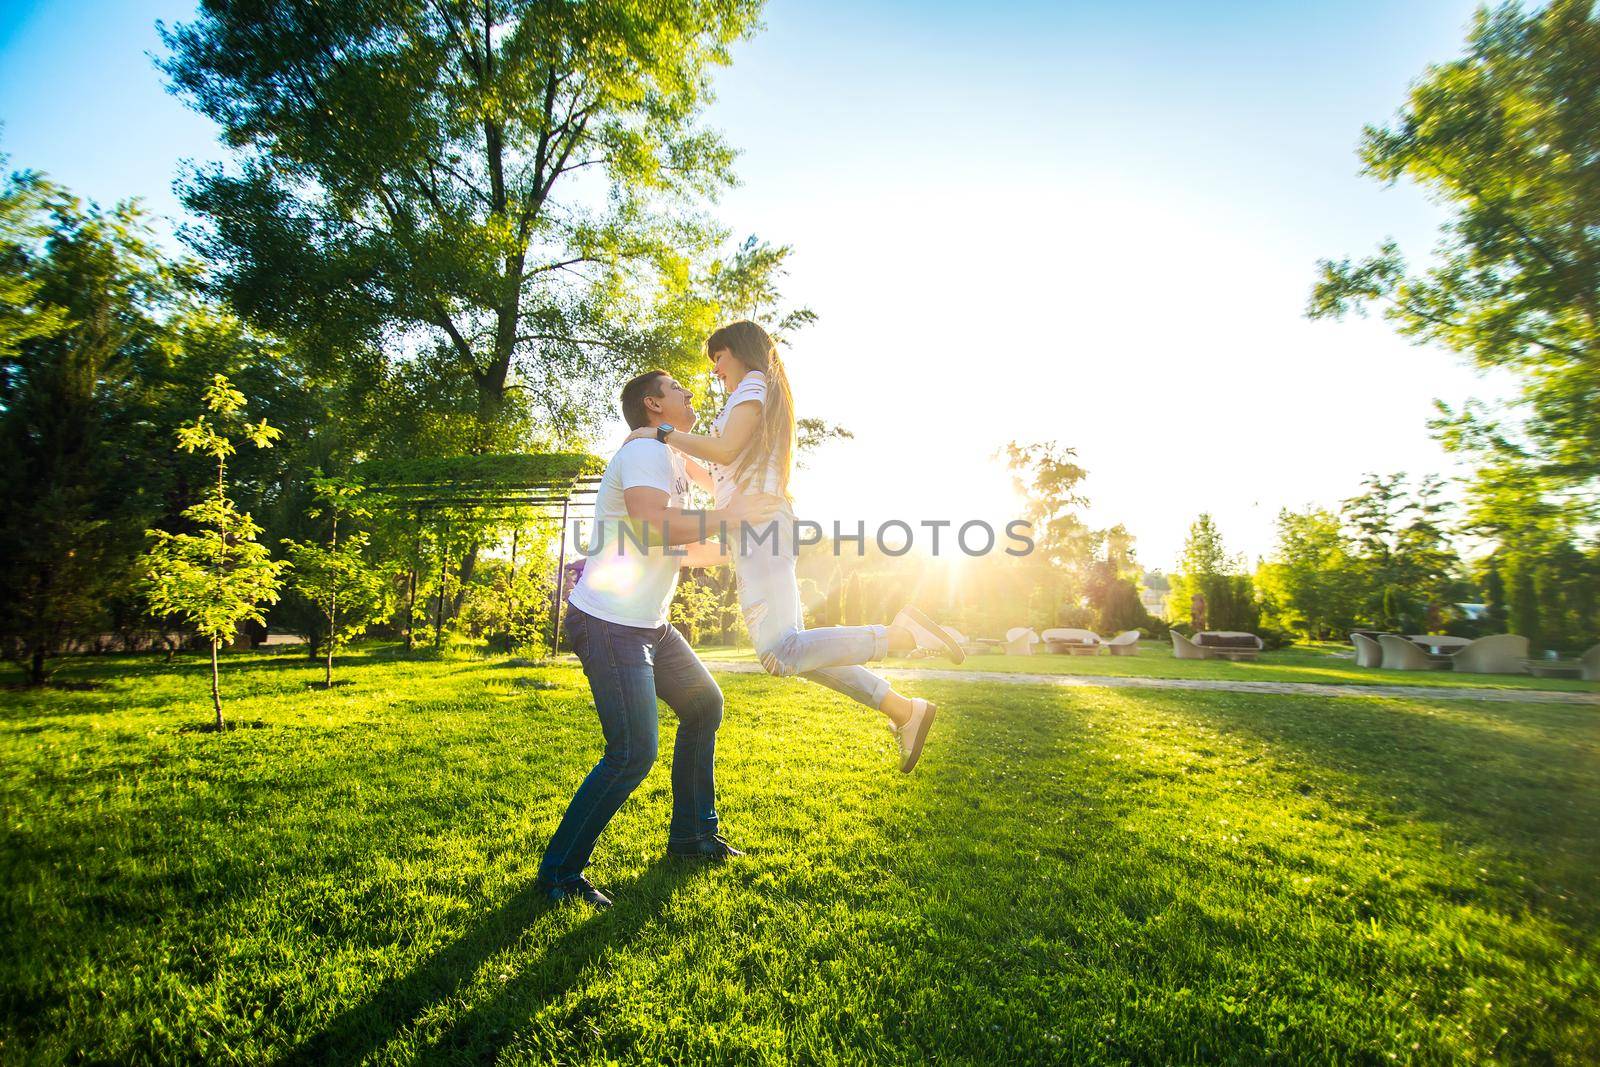 Young romantic couple have fun enjoy each other in green summer park by Try_my_best